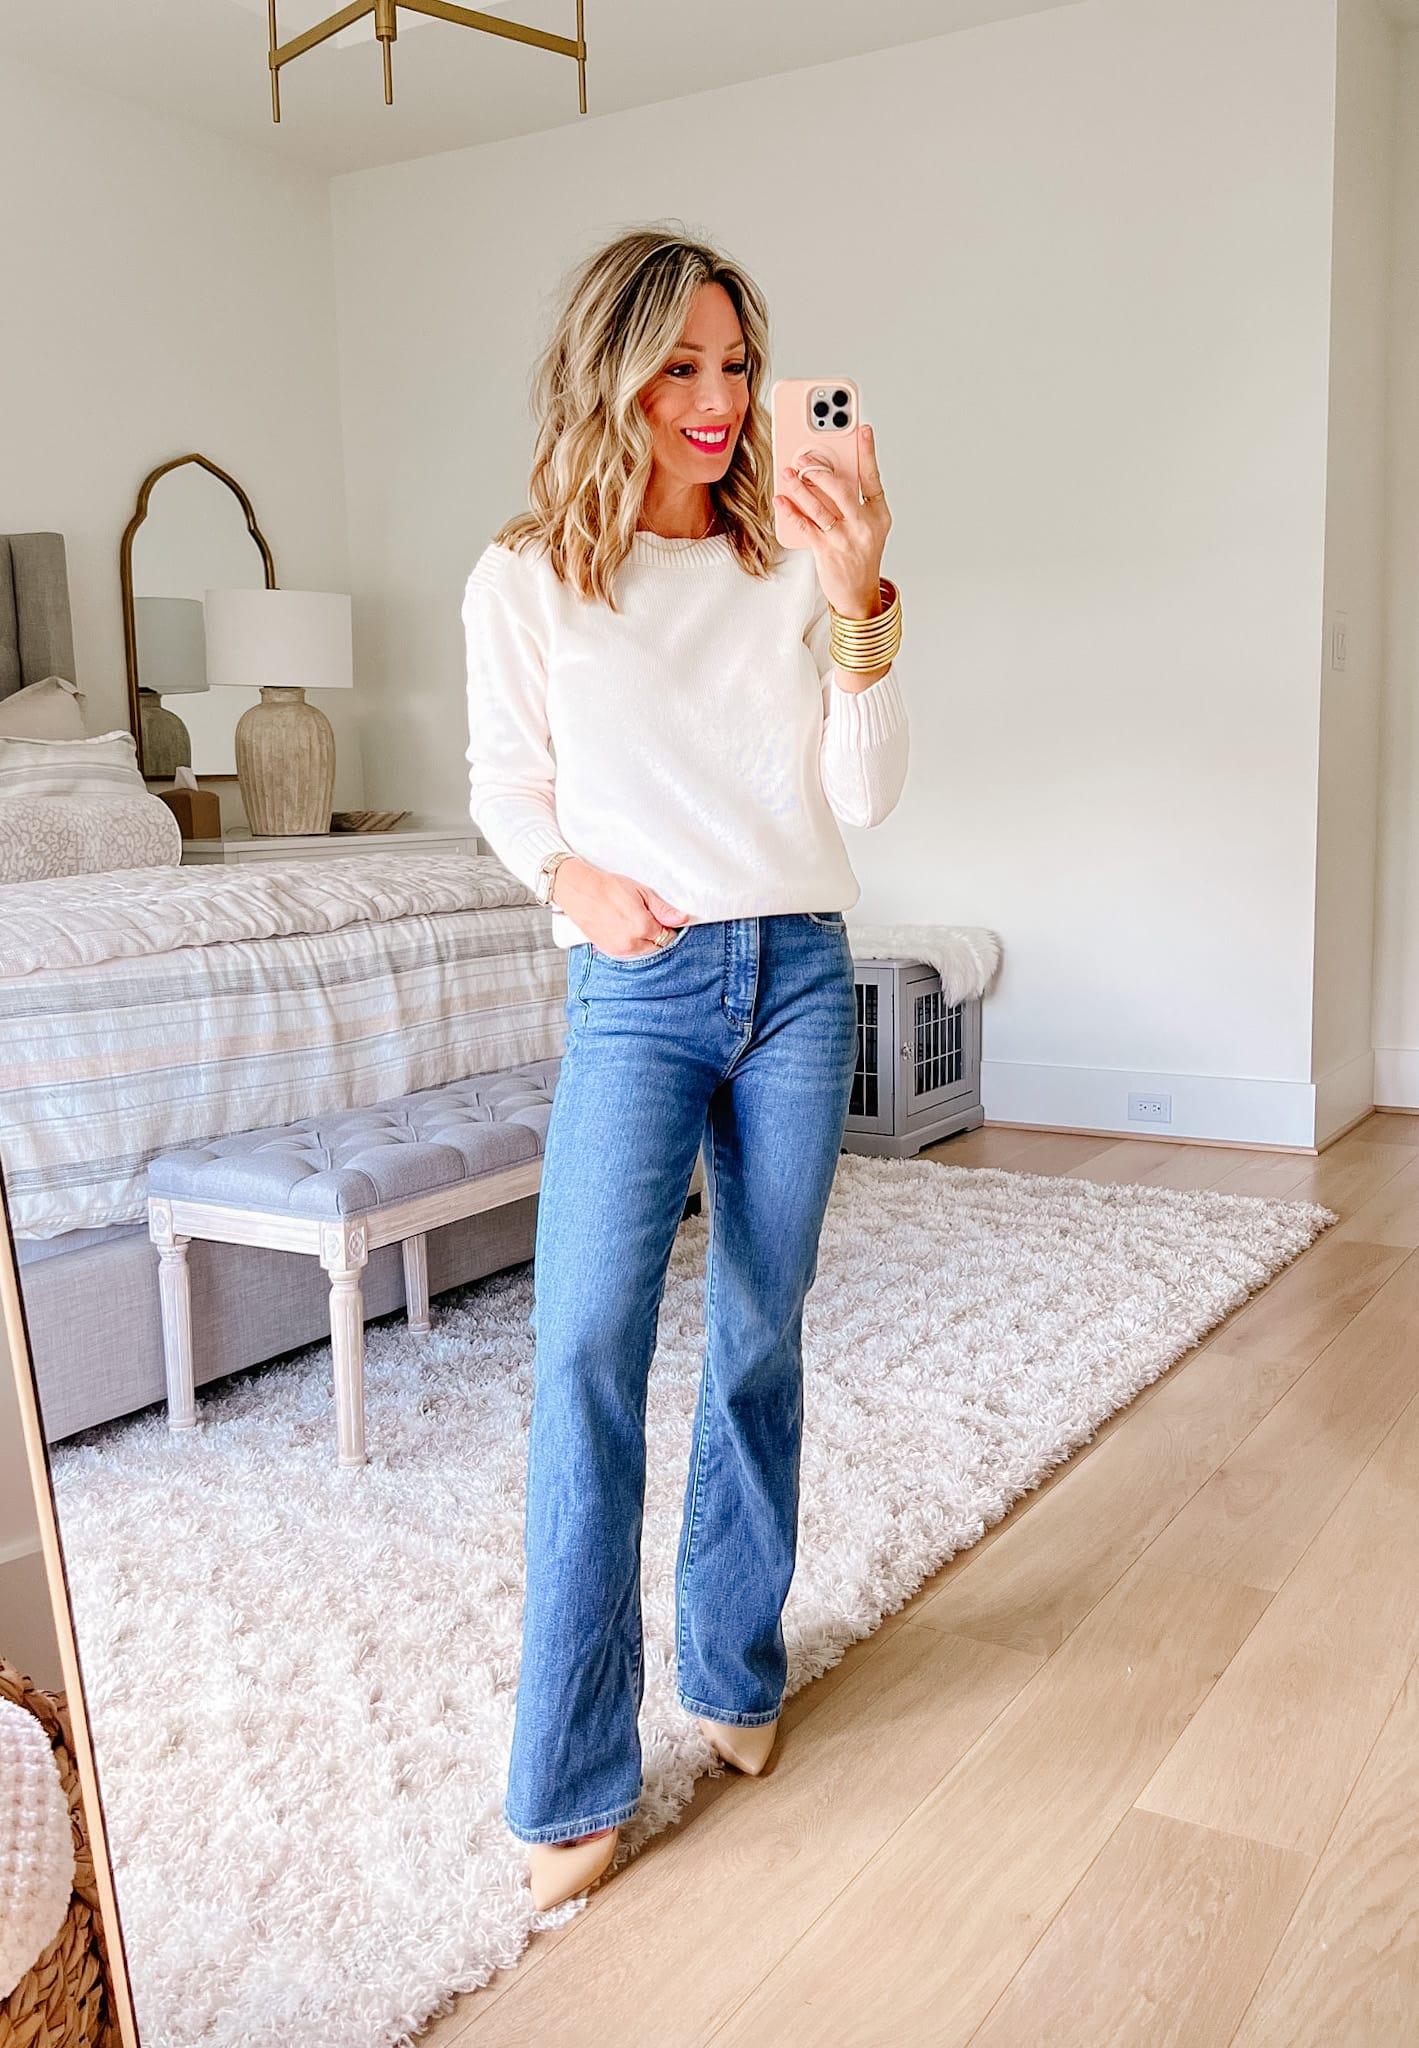 White Top, Jeans, Heels 